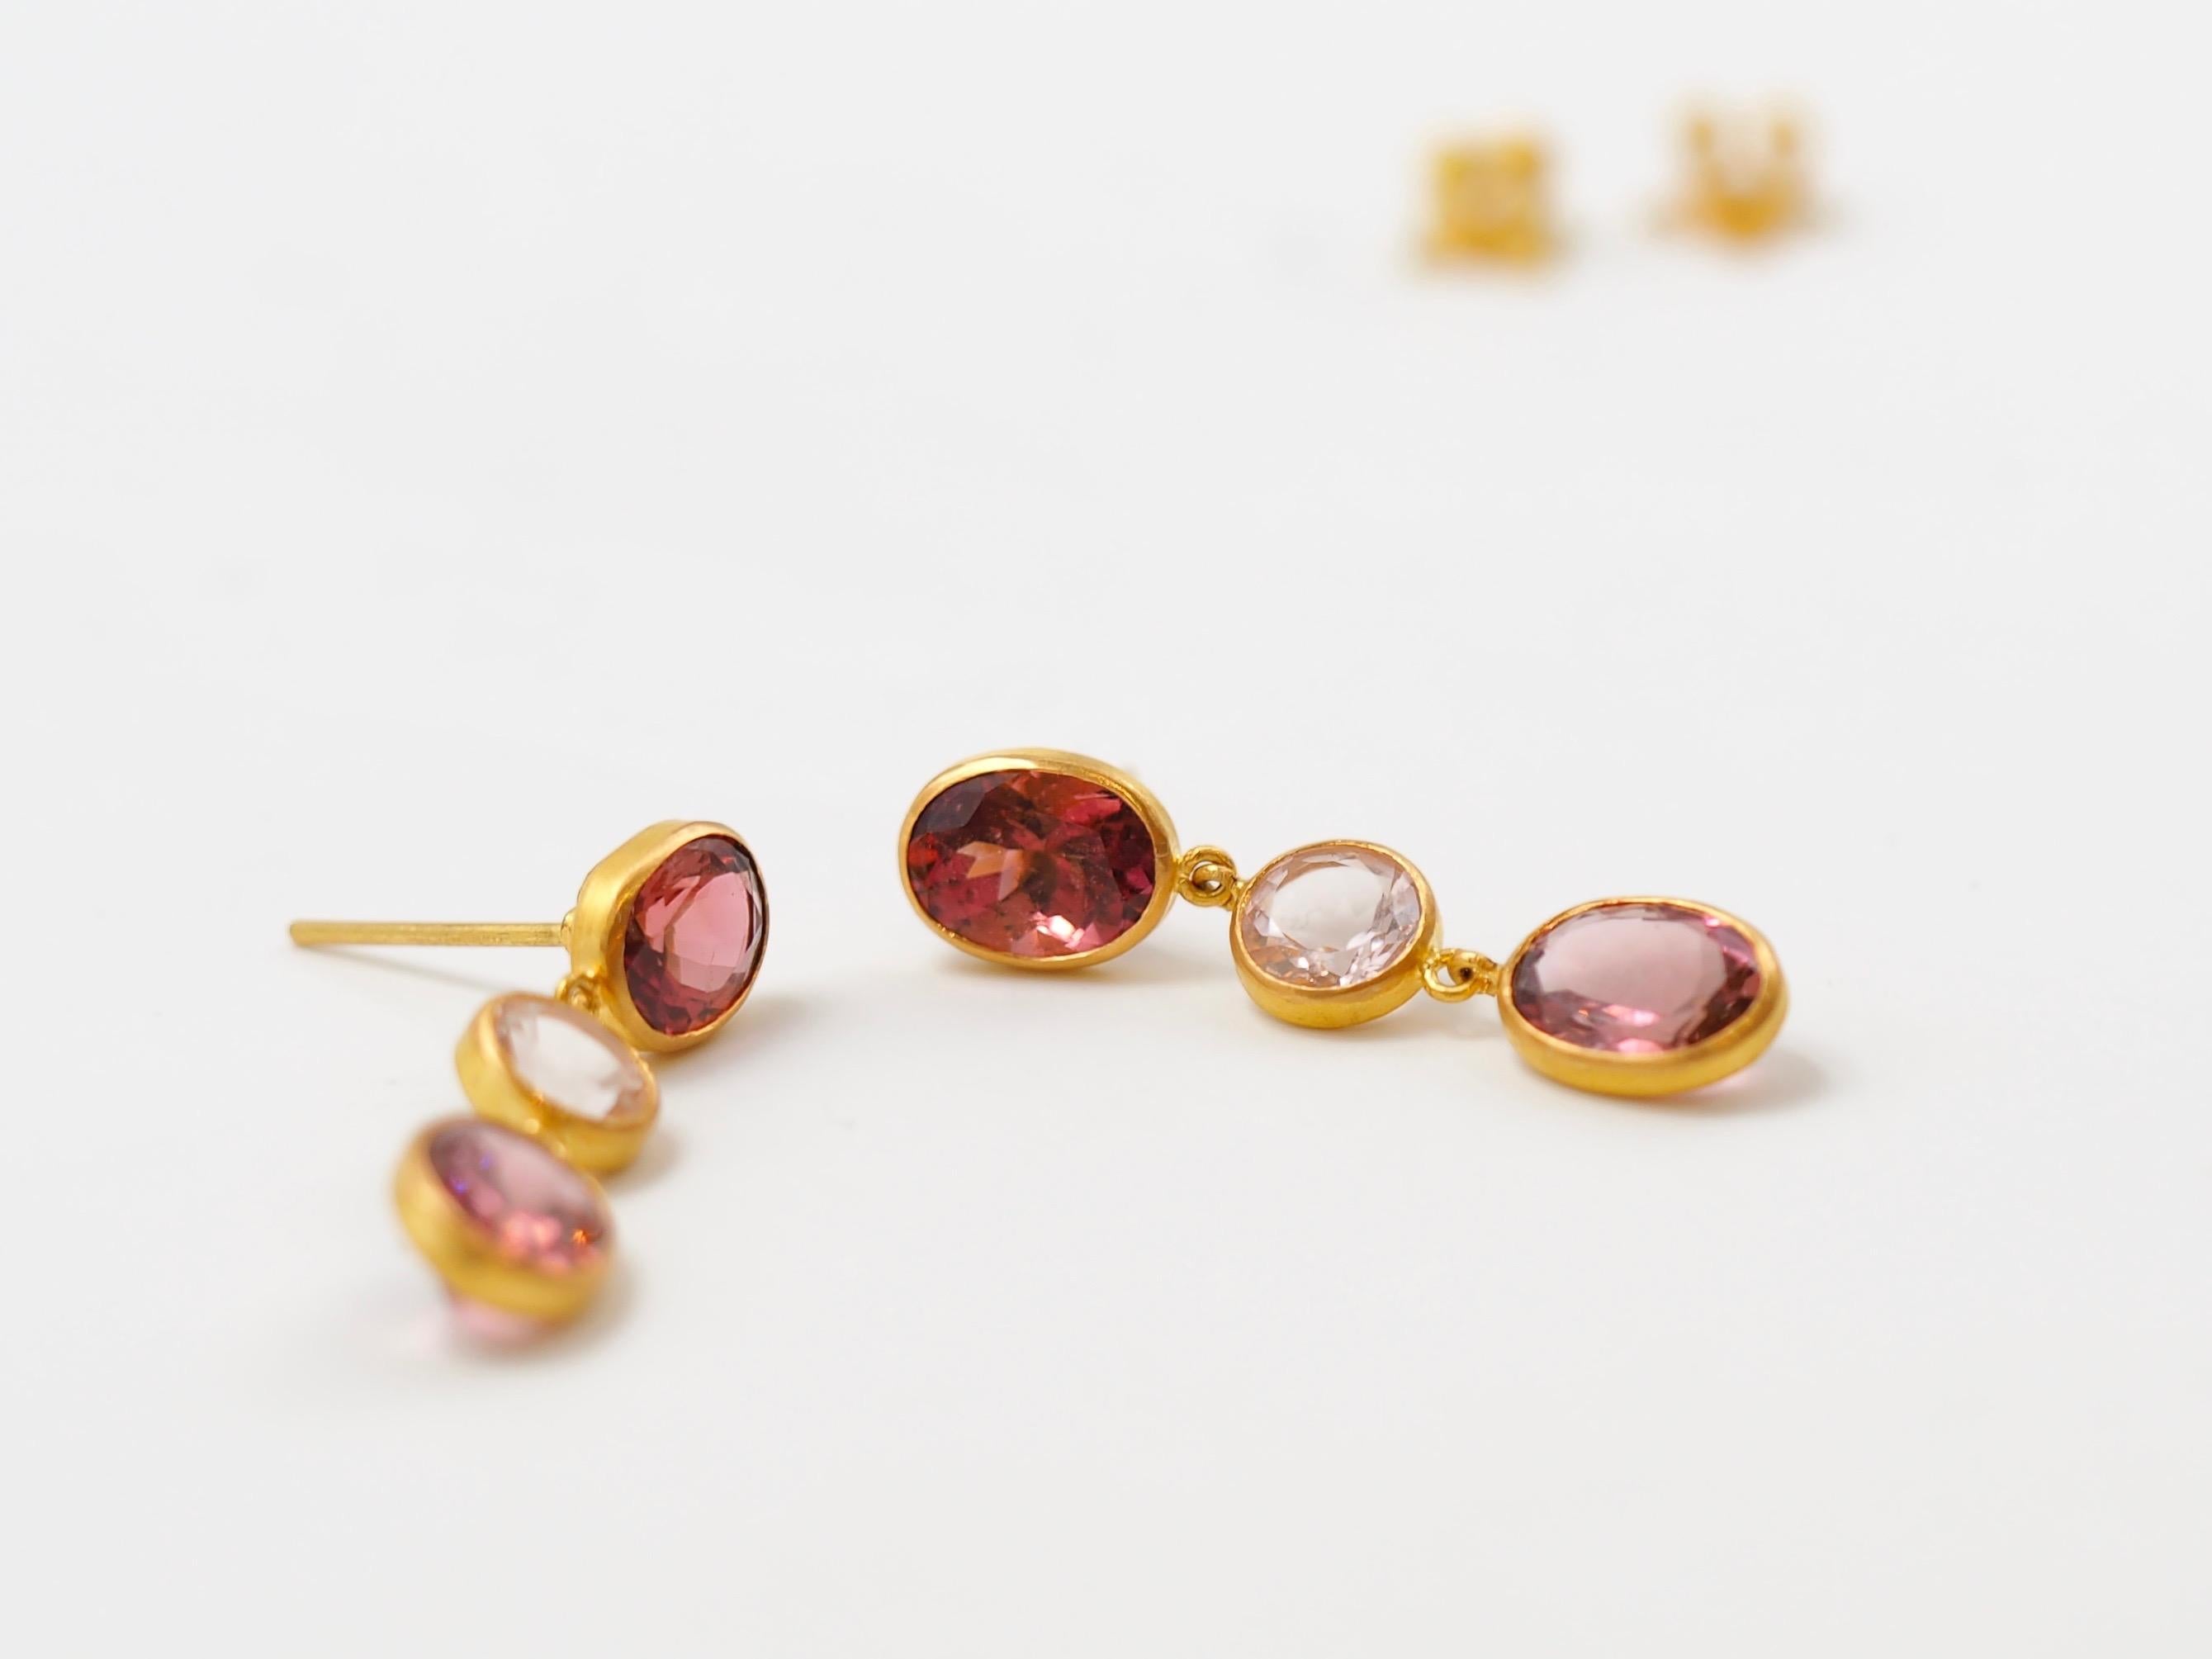 These colourful earrings by Scrives are composed of 4 ovales tourmalines (2 medium purples & 2 darker purples) & 2 round light  morganites.
Tourmalines & morganites total weight is 6.72 cts. 
The tourmalines and morganites are high quality